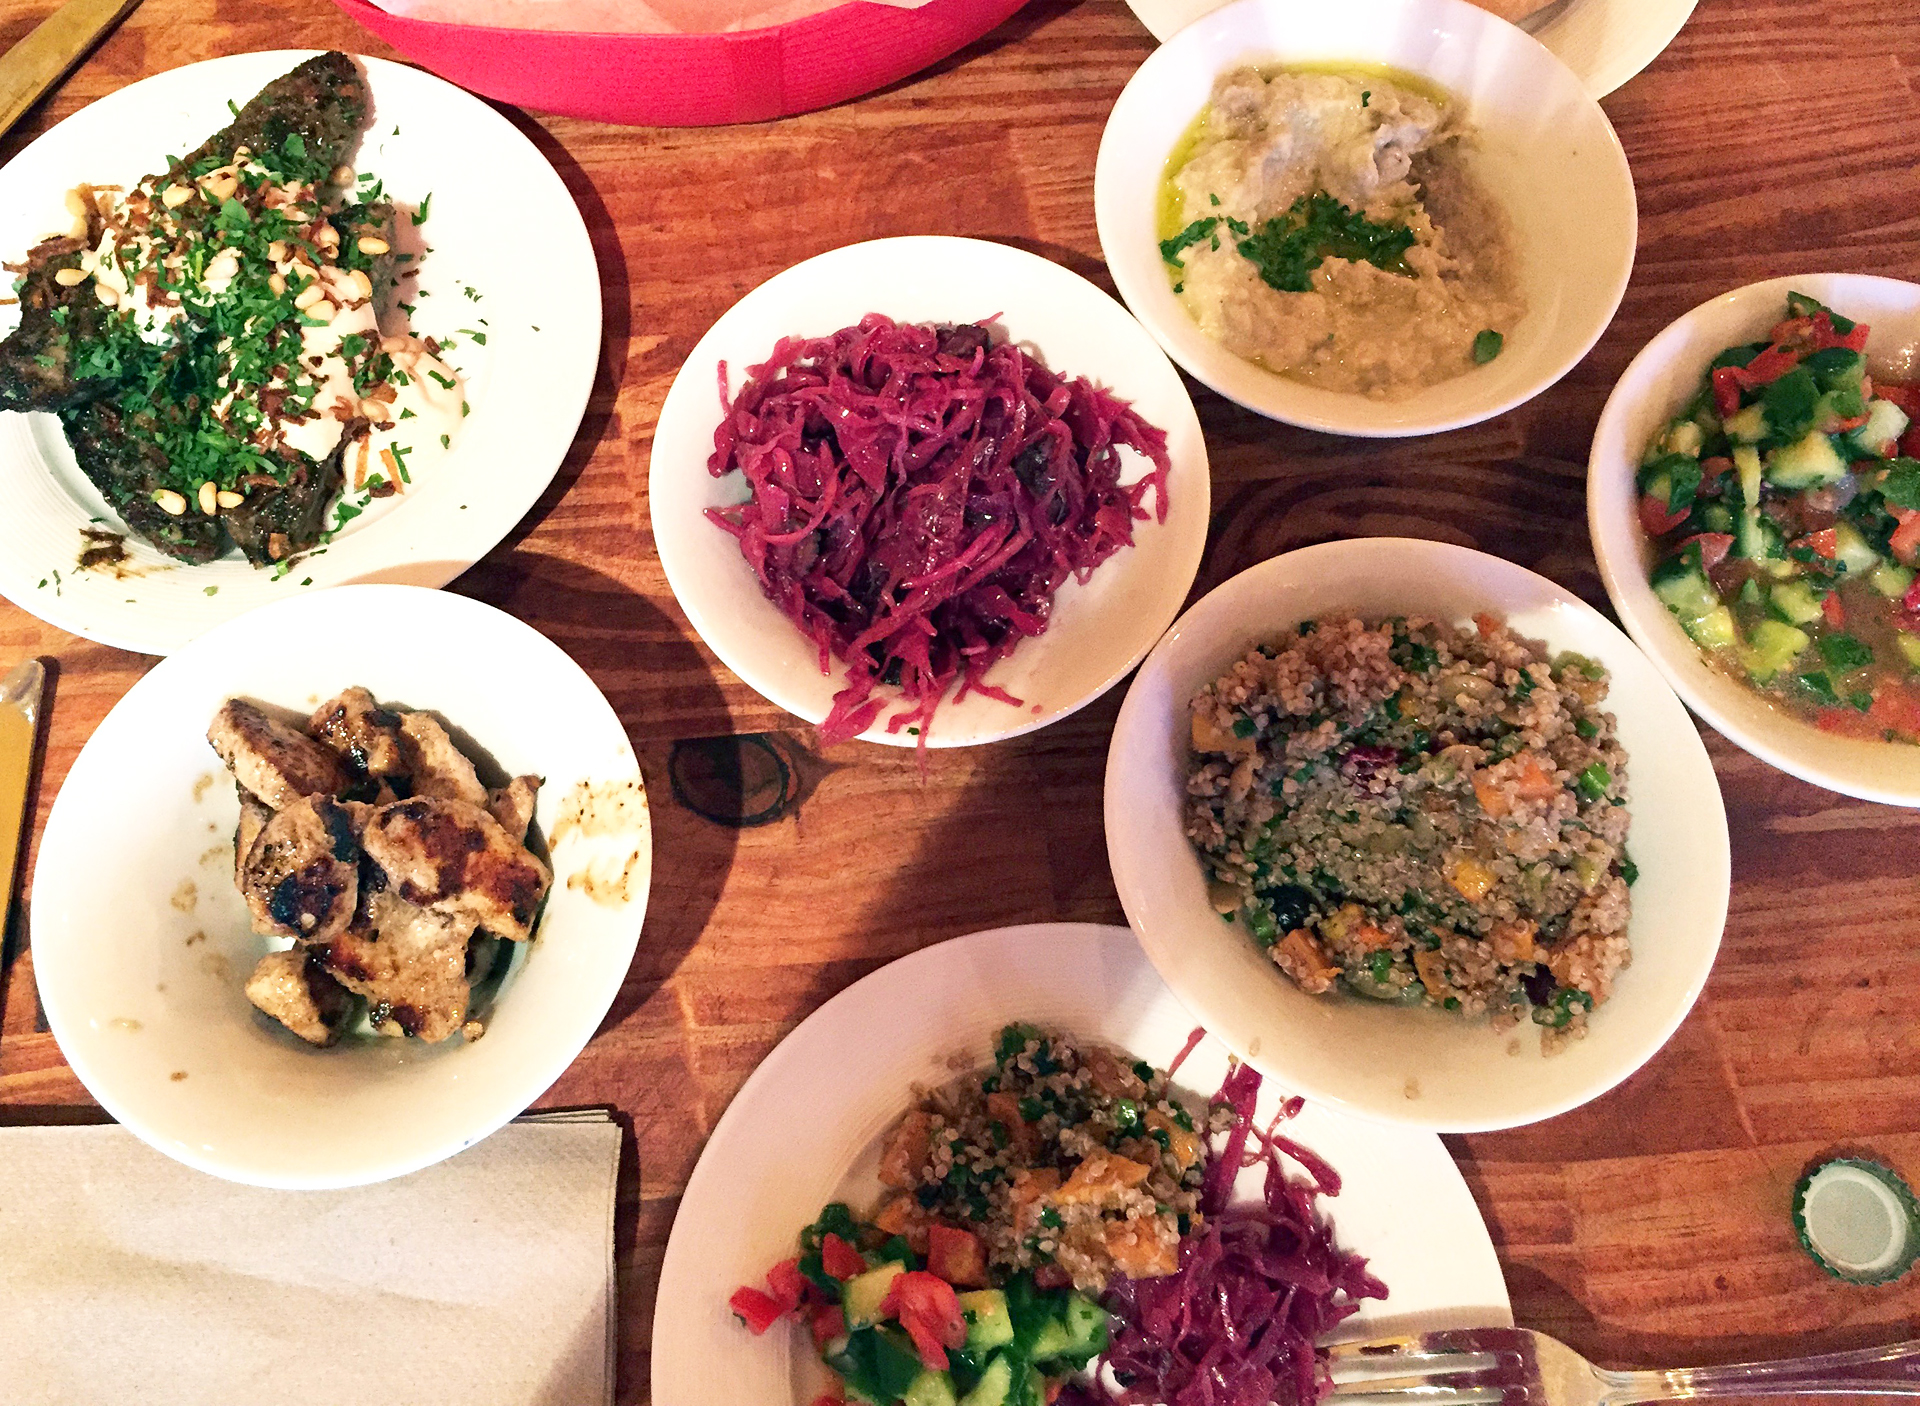 A generous spread at Ba-Bite, including butternut squash and quinoa salad with cranberries and pumpkin seeds; Salad Shirazi (cucumbers, tomatoes, parsley and mint), Red Cabbage salad, Baba Ganoush, Lamb Kefta and  Chicken Shishlik.